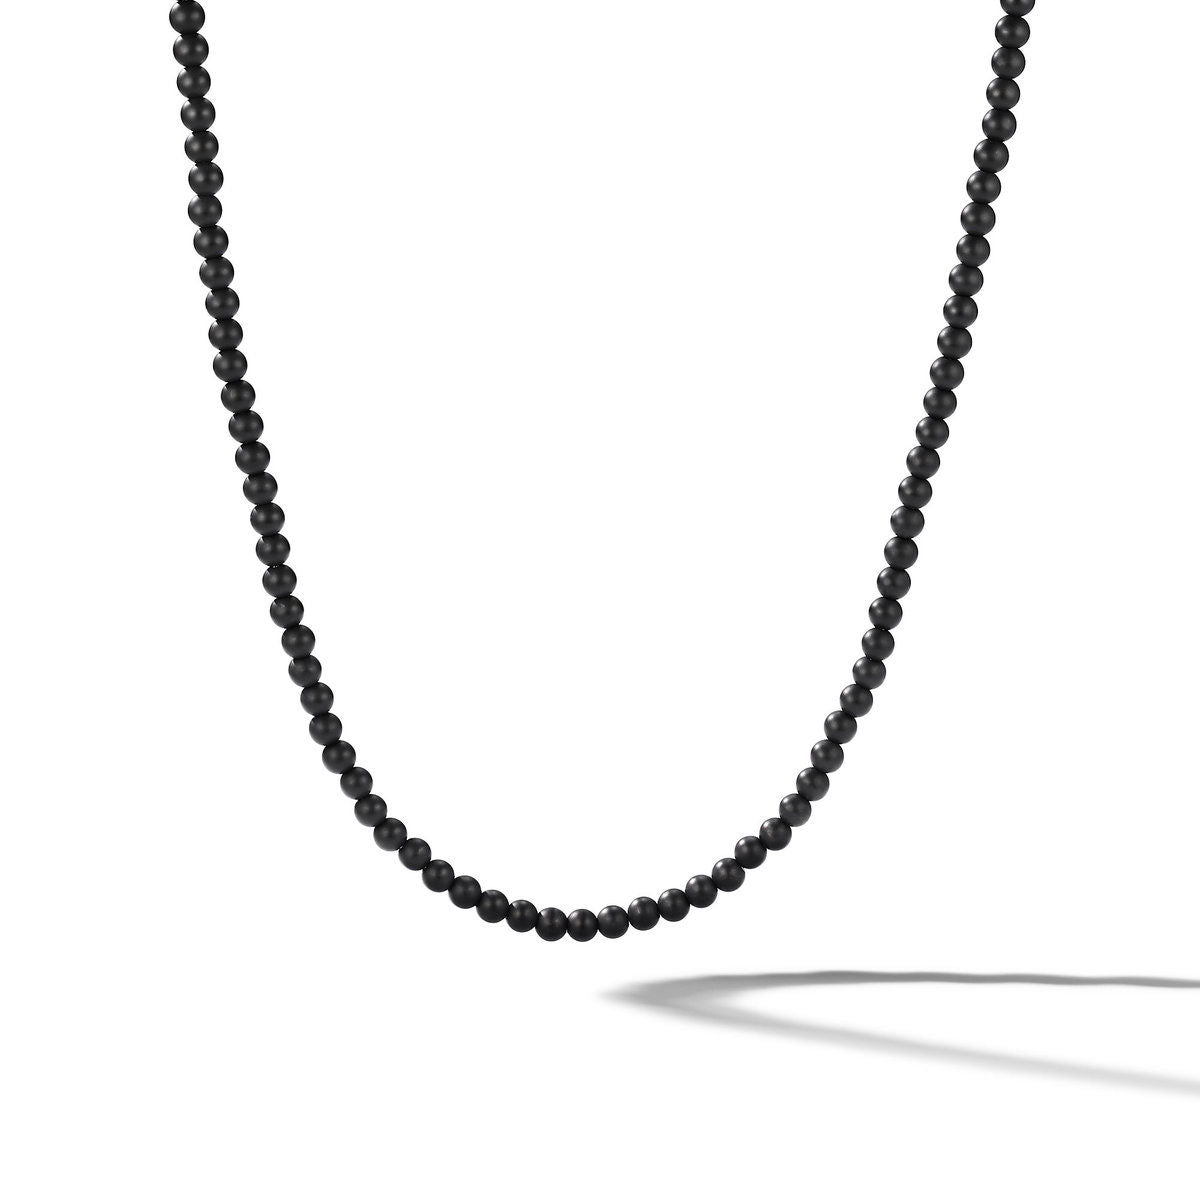 Spiritual Beads Necklace in Sterling Silver with Black Onyx